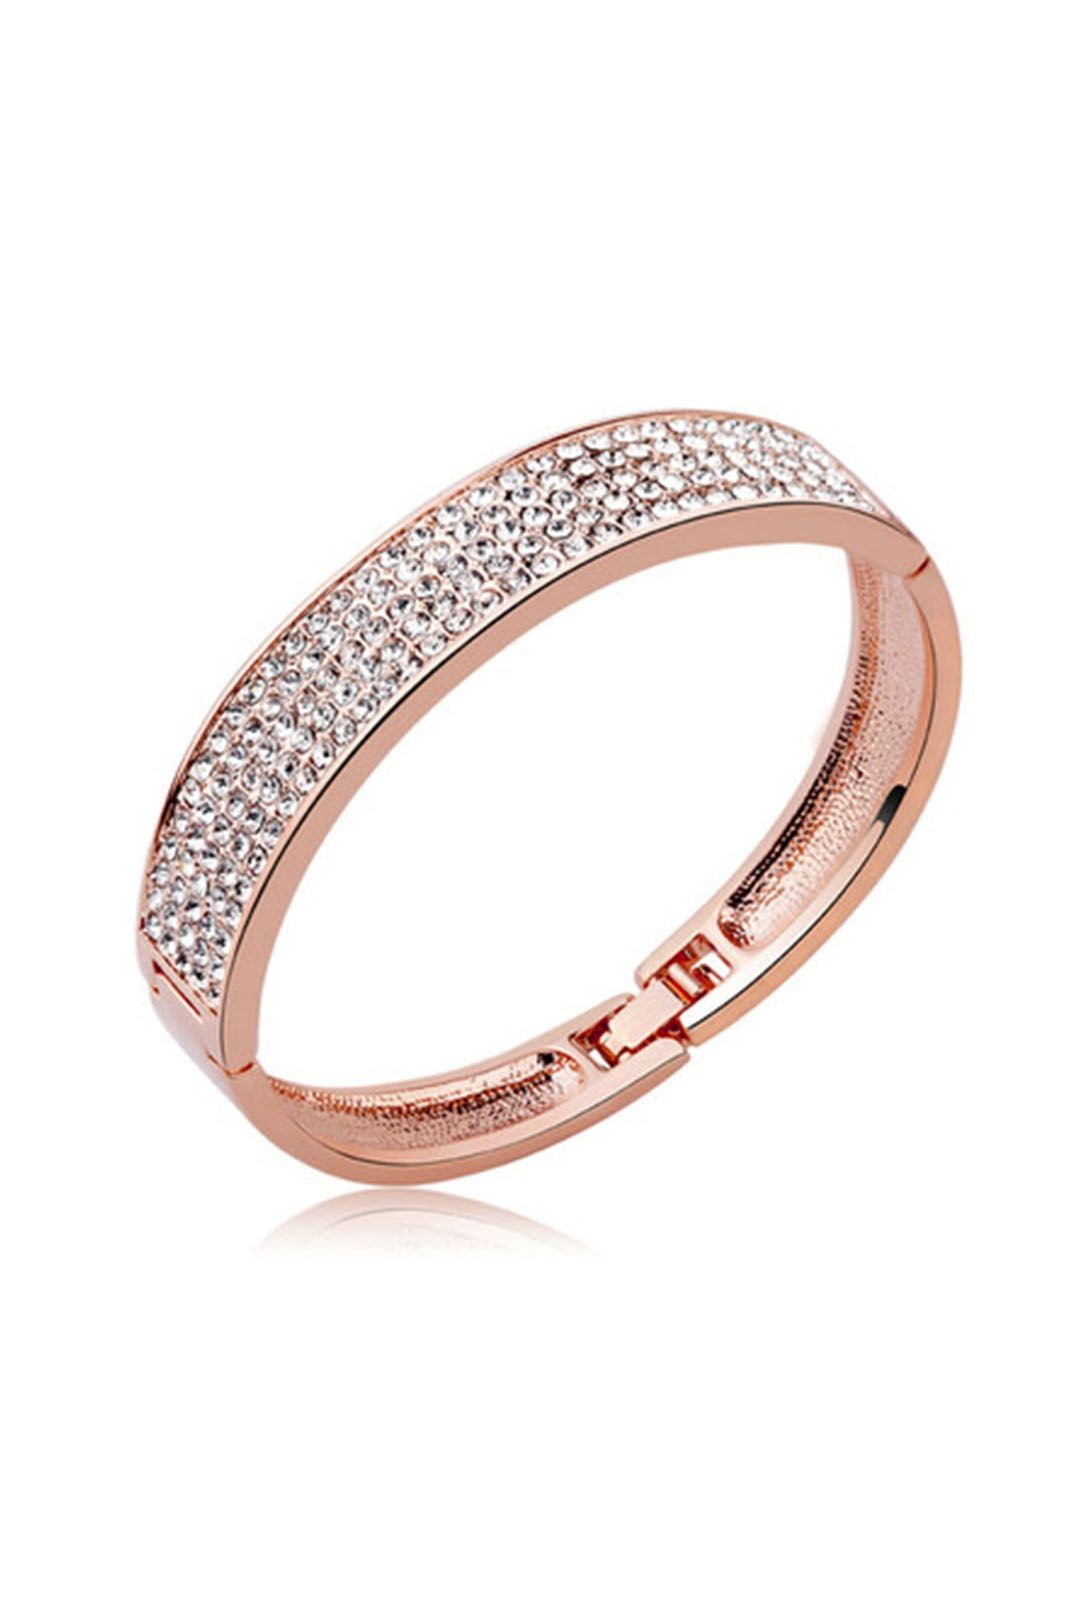 Krystal Couture - Classic Bangle - Rose Gold - Side